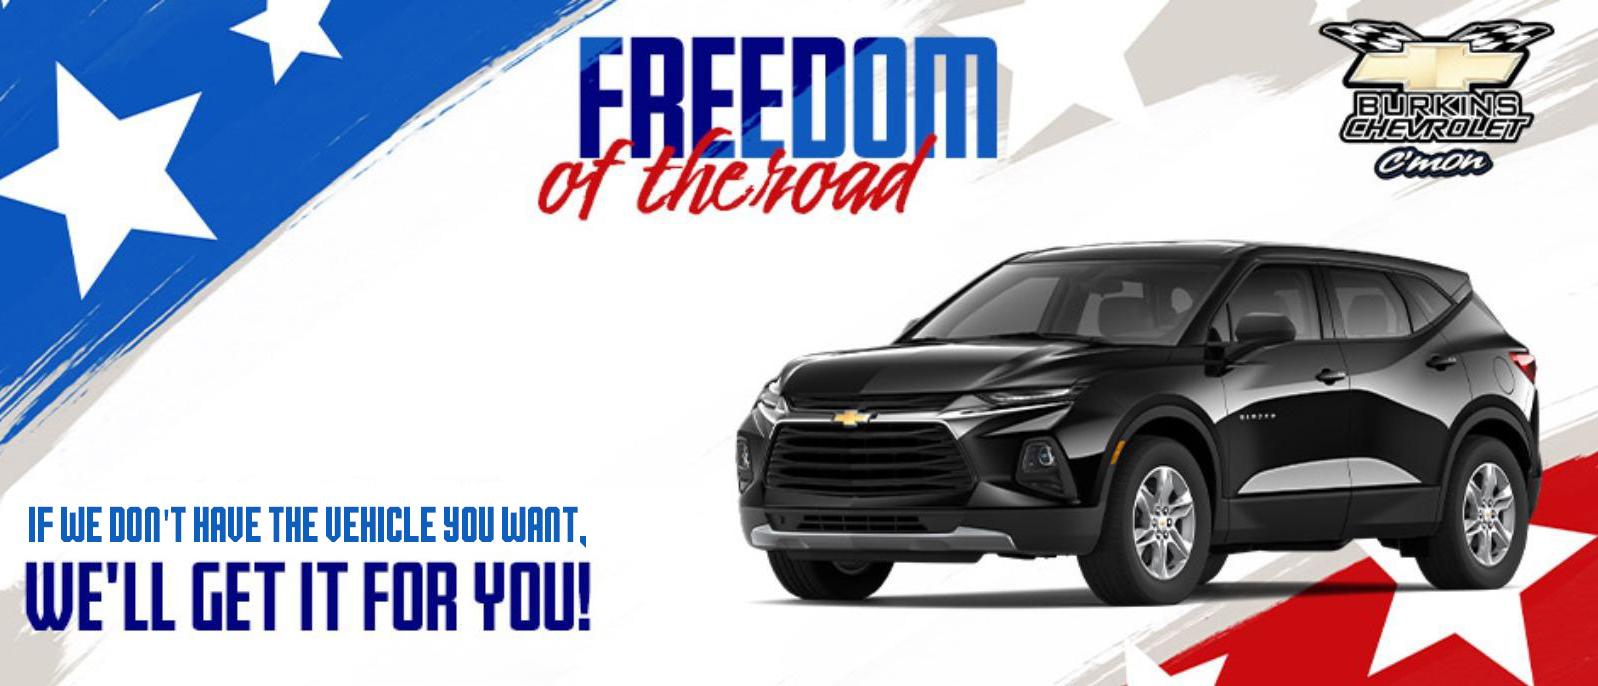 Freedom of the Road at Burkins Chevrolet in Macclenny, FL